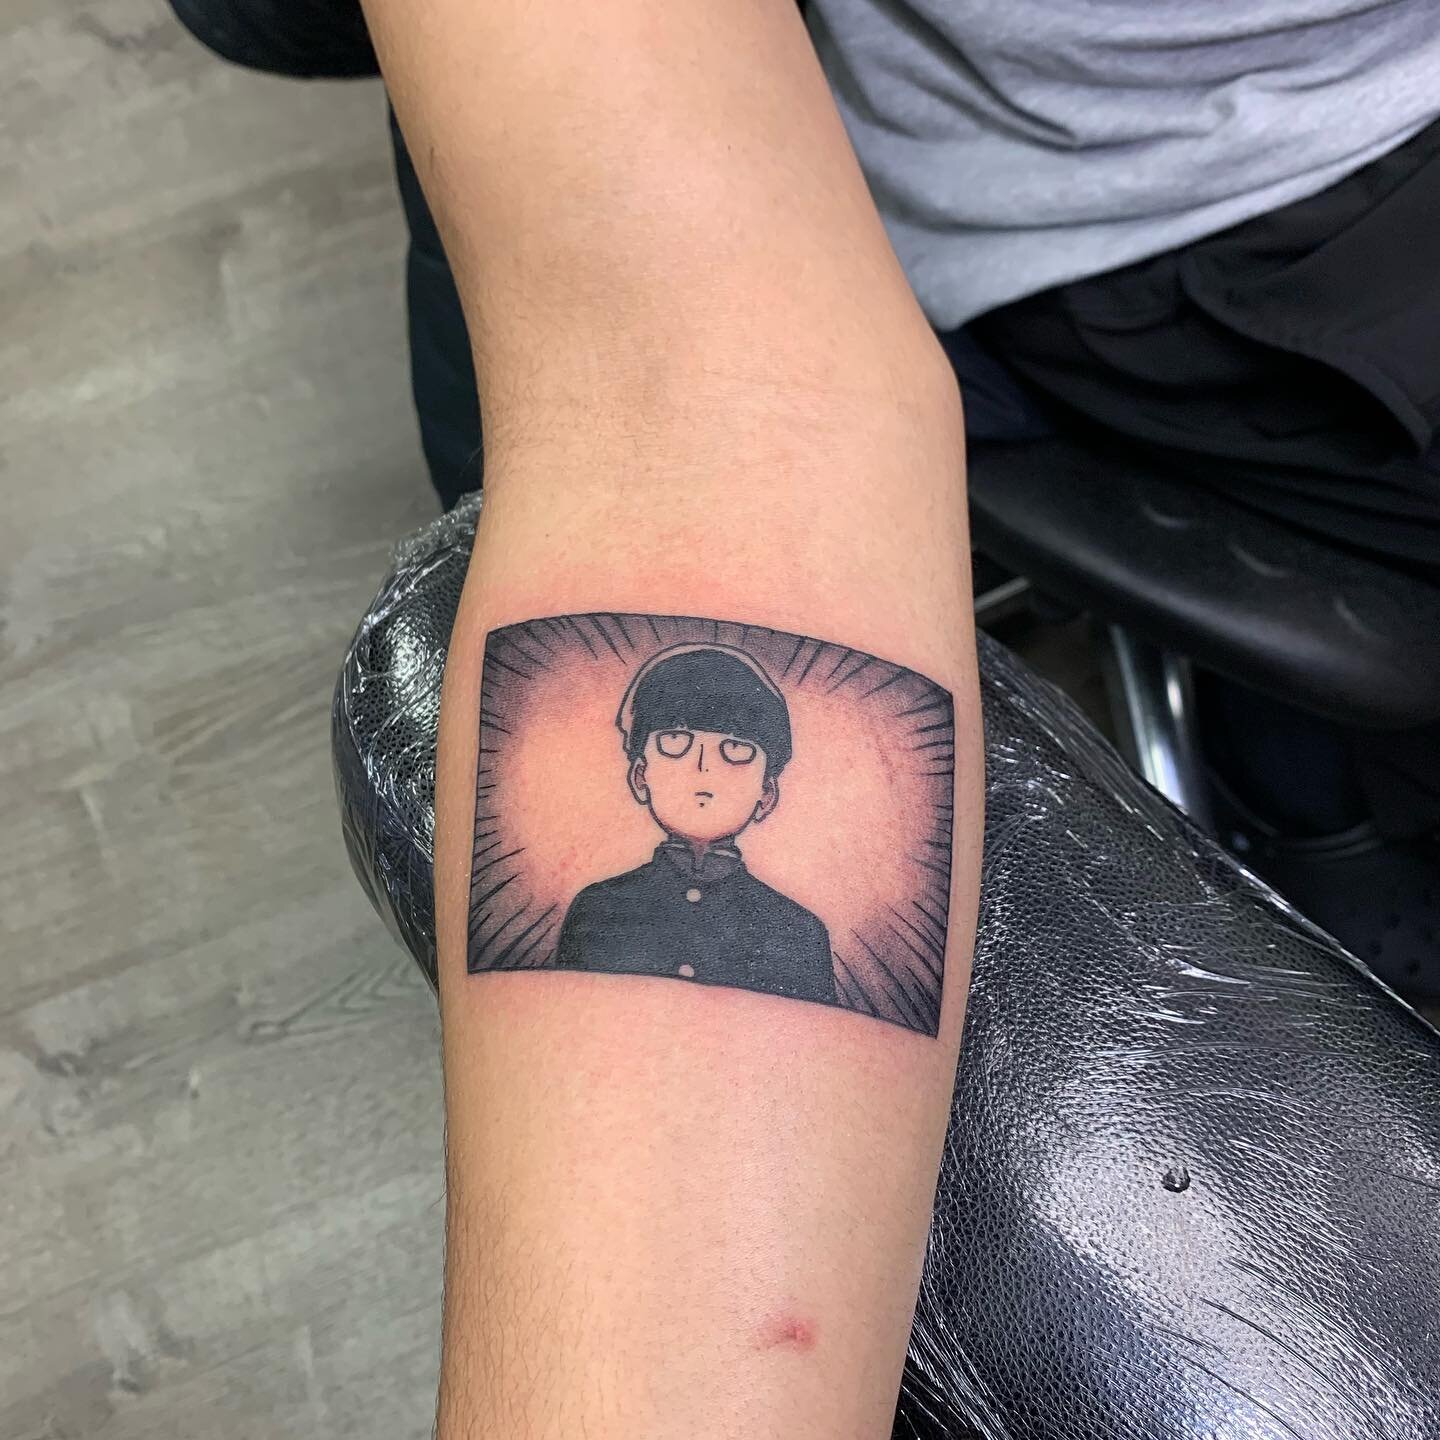 Some anime panel, Mob Psycho 100. Had fun with this little one lol #massachusetts #westernmasstattoo #Connecticut #connecticuttattoo #southwindsor #angrypenciltattoo #tattoo #tattoos #eternalink #hivecaps #saniderm #helios #dragonsbloodbutter #MAtatt